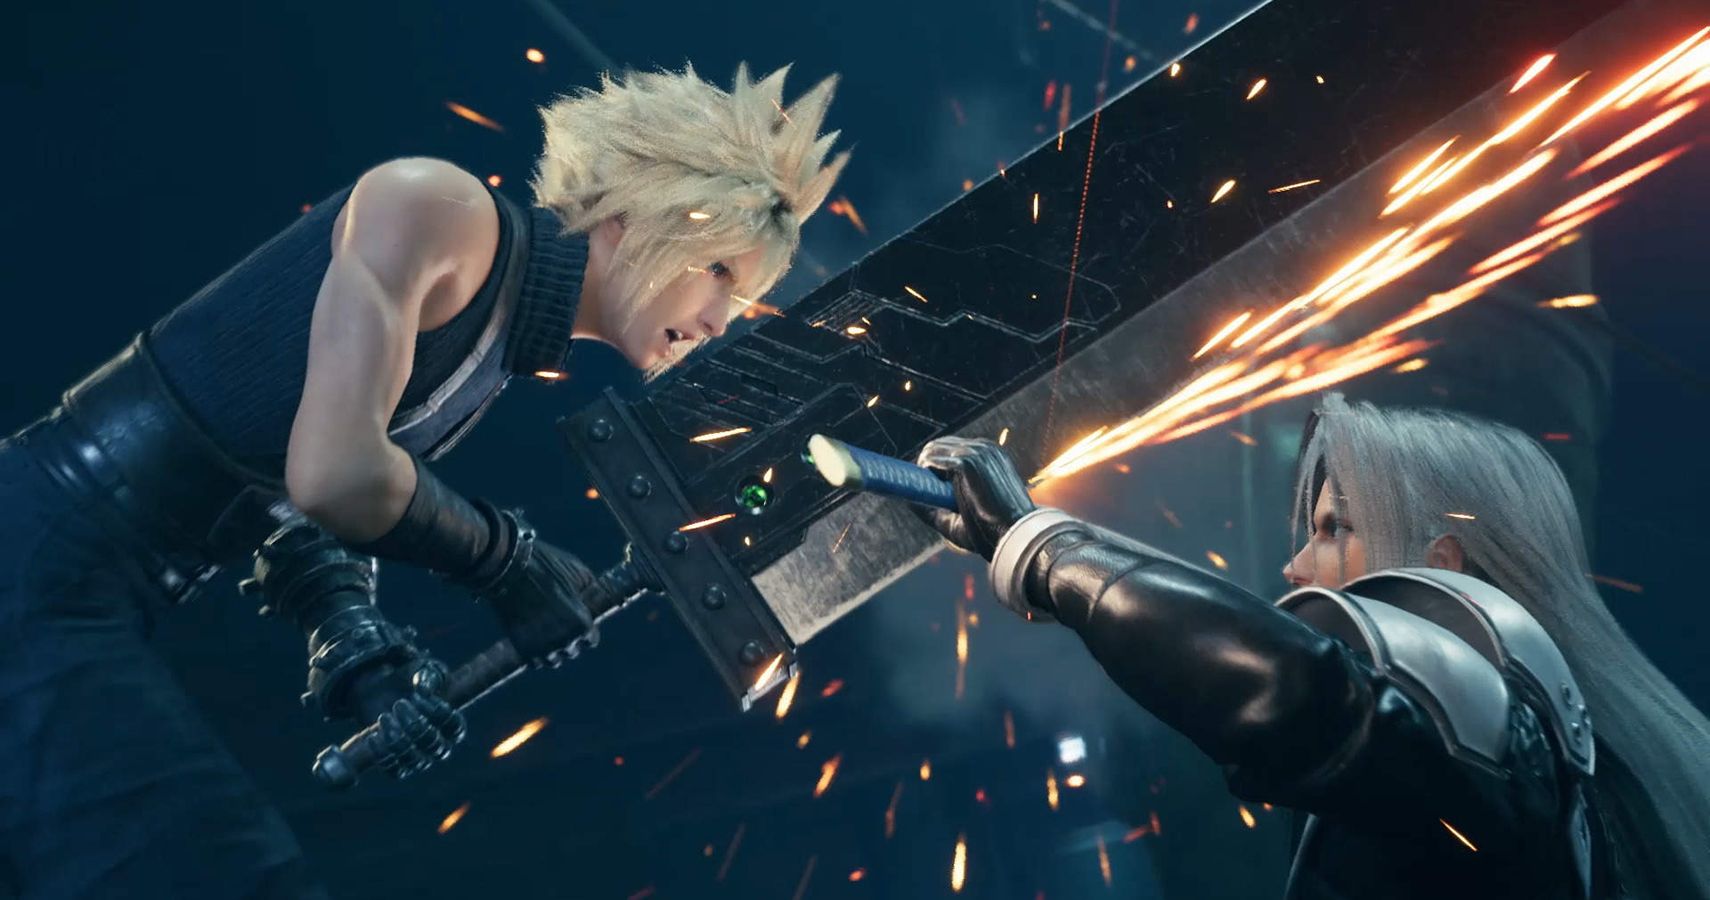 Final Fantasy 7 Remake: How to Heal